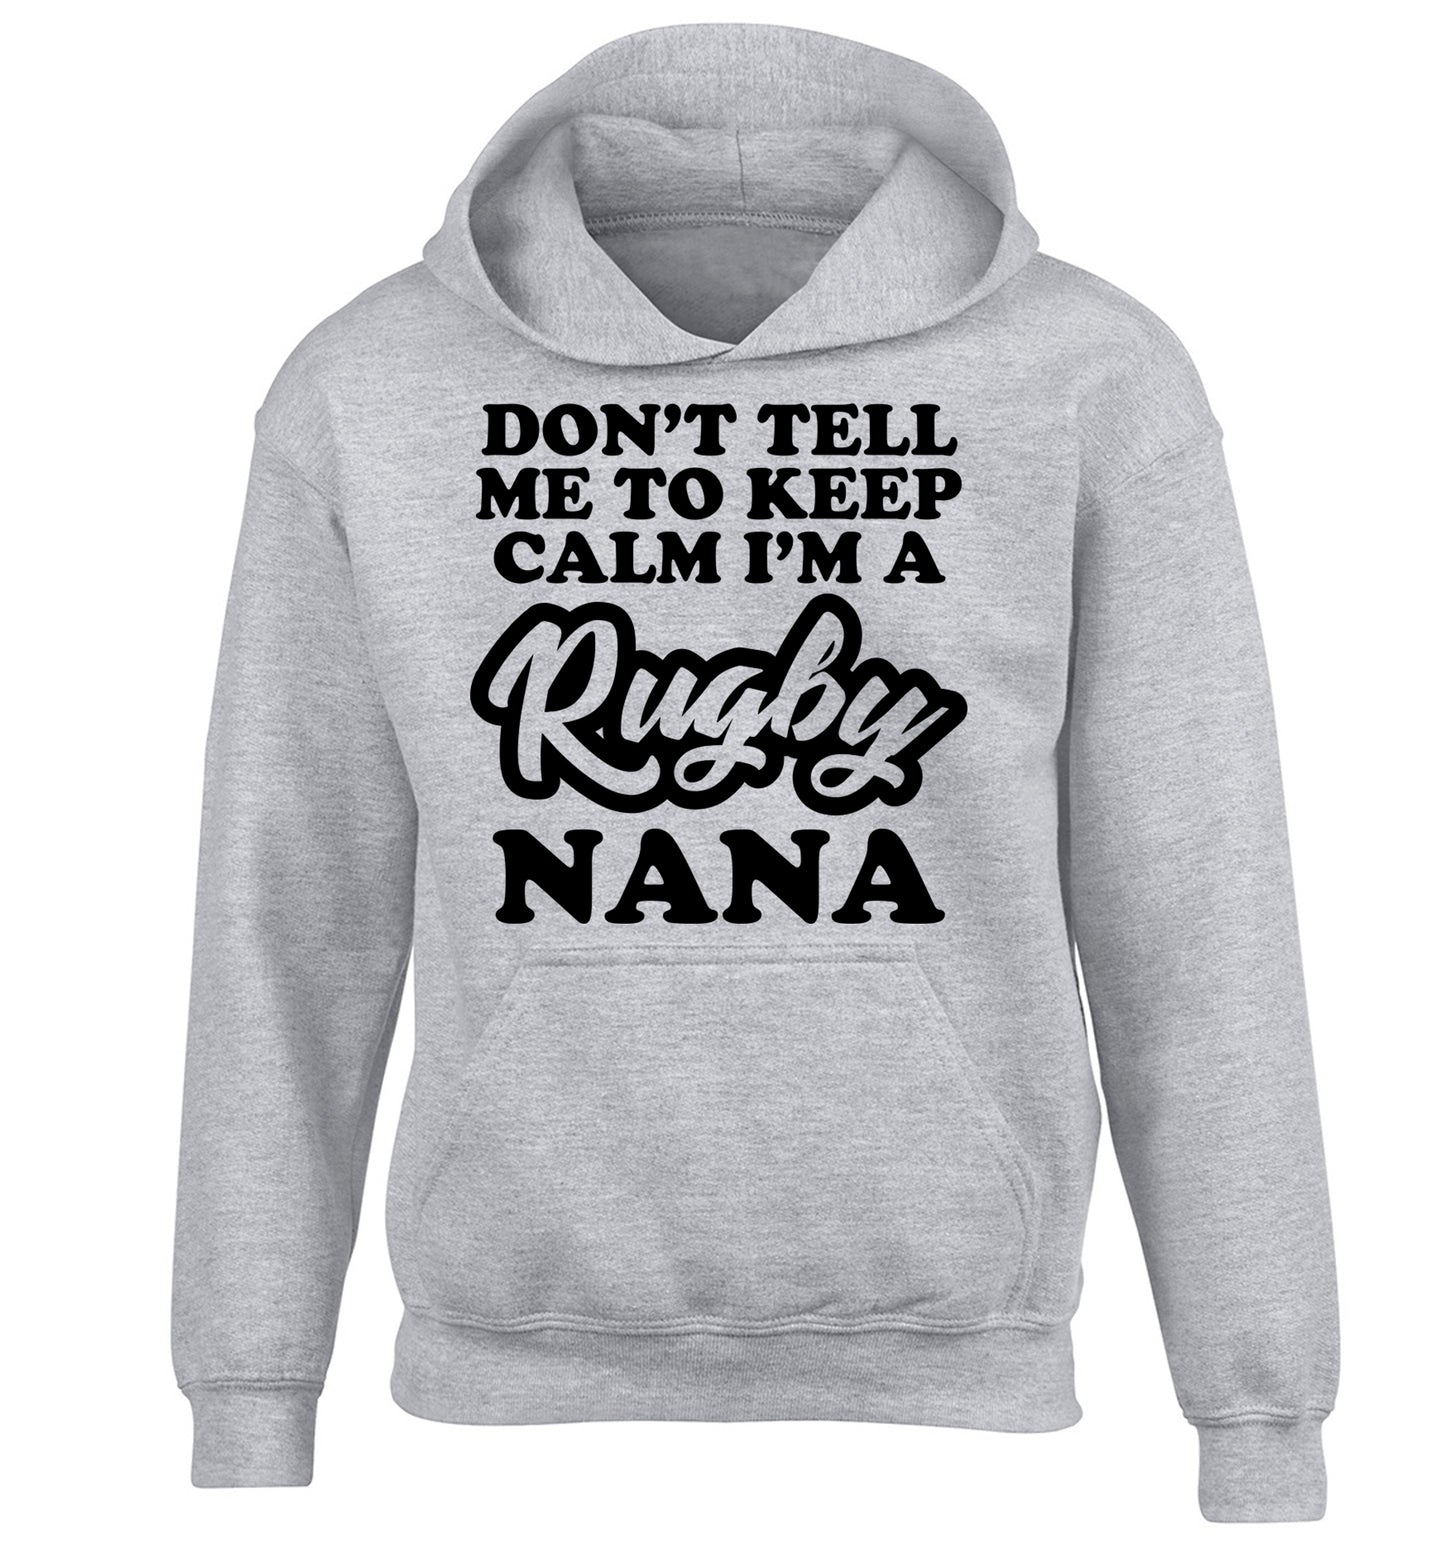 Don't tell me to keep calm I'm a rugby nana children's grey hoodie 12-13 Years